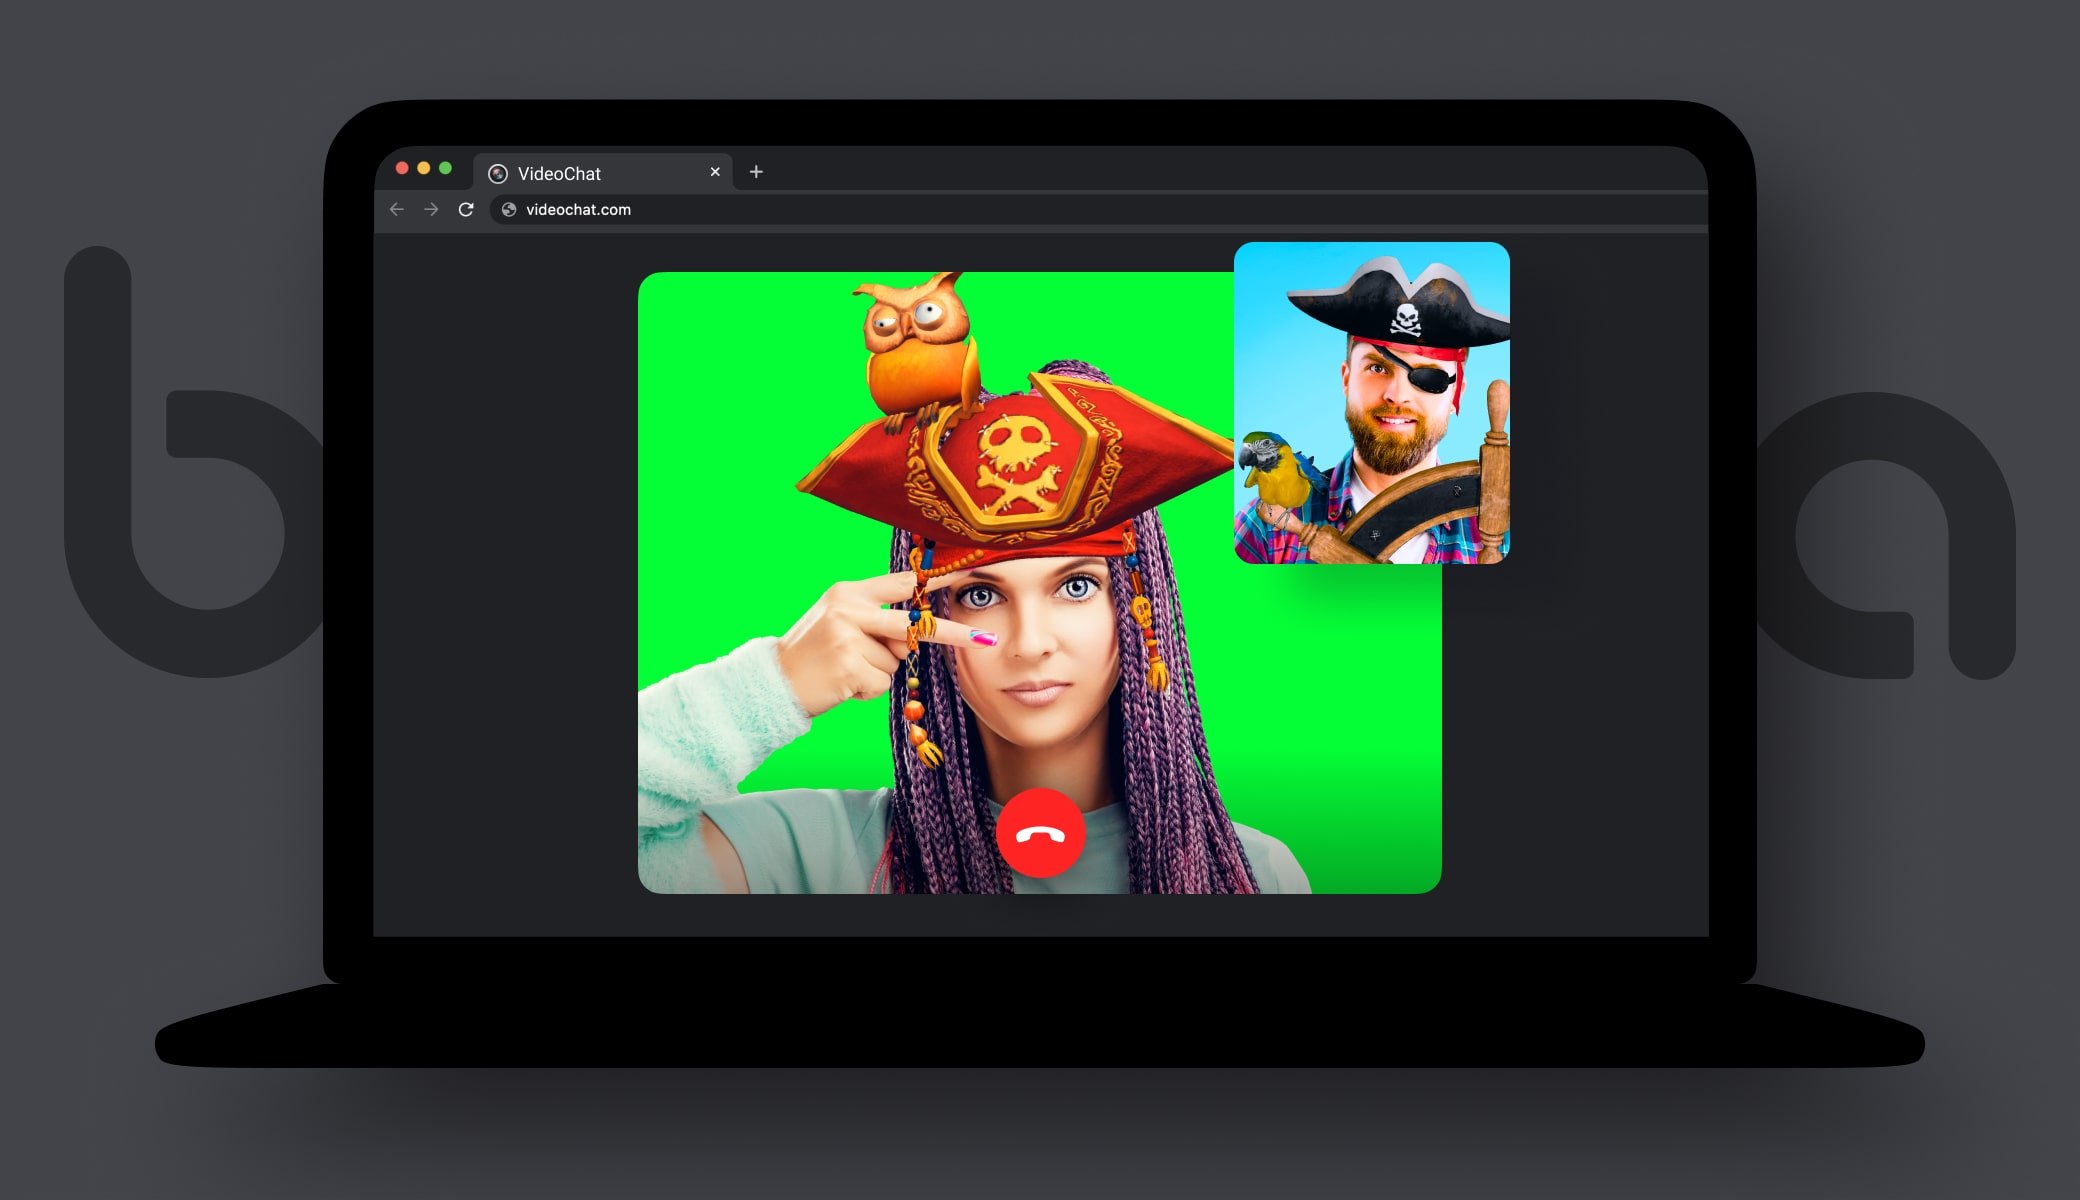 You Can Now Customise Your Steam Profile with Animated Avatars, Frames,  Backgrounds, and More